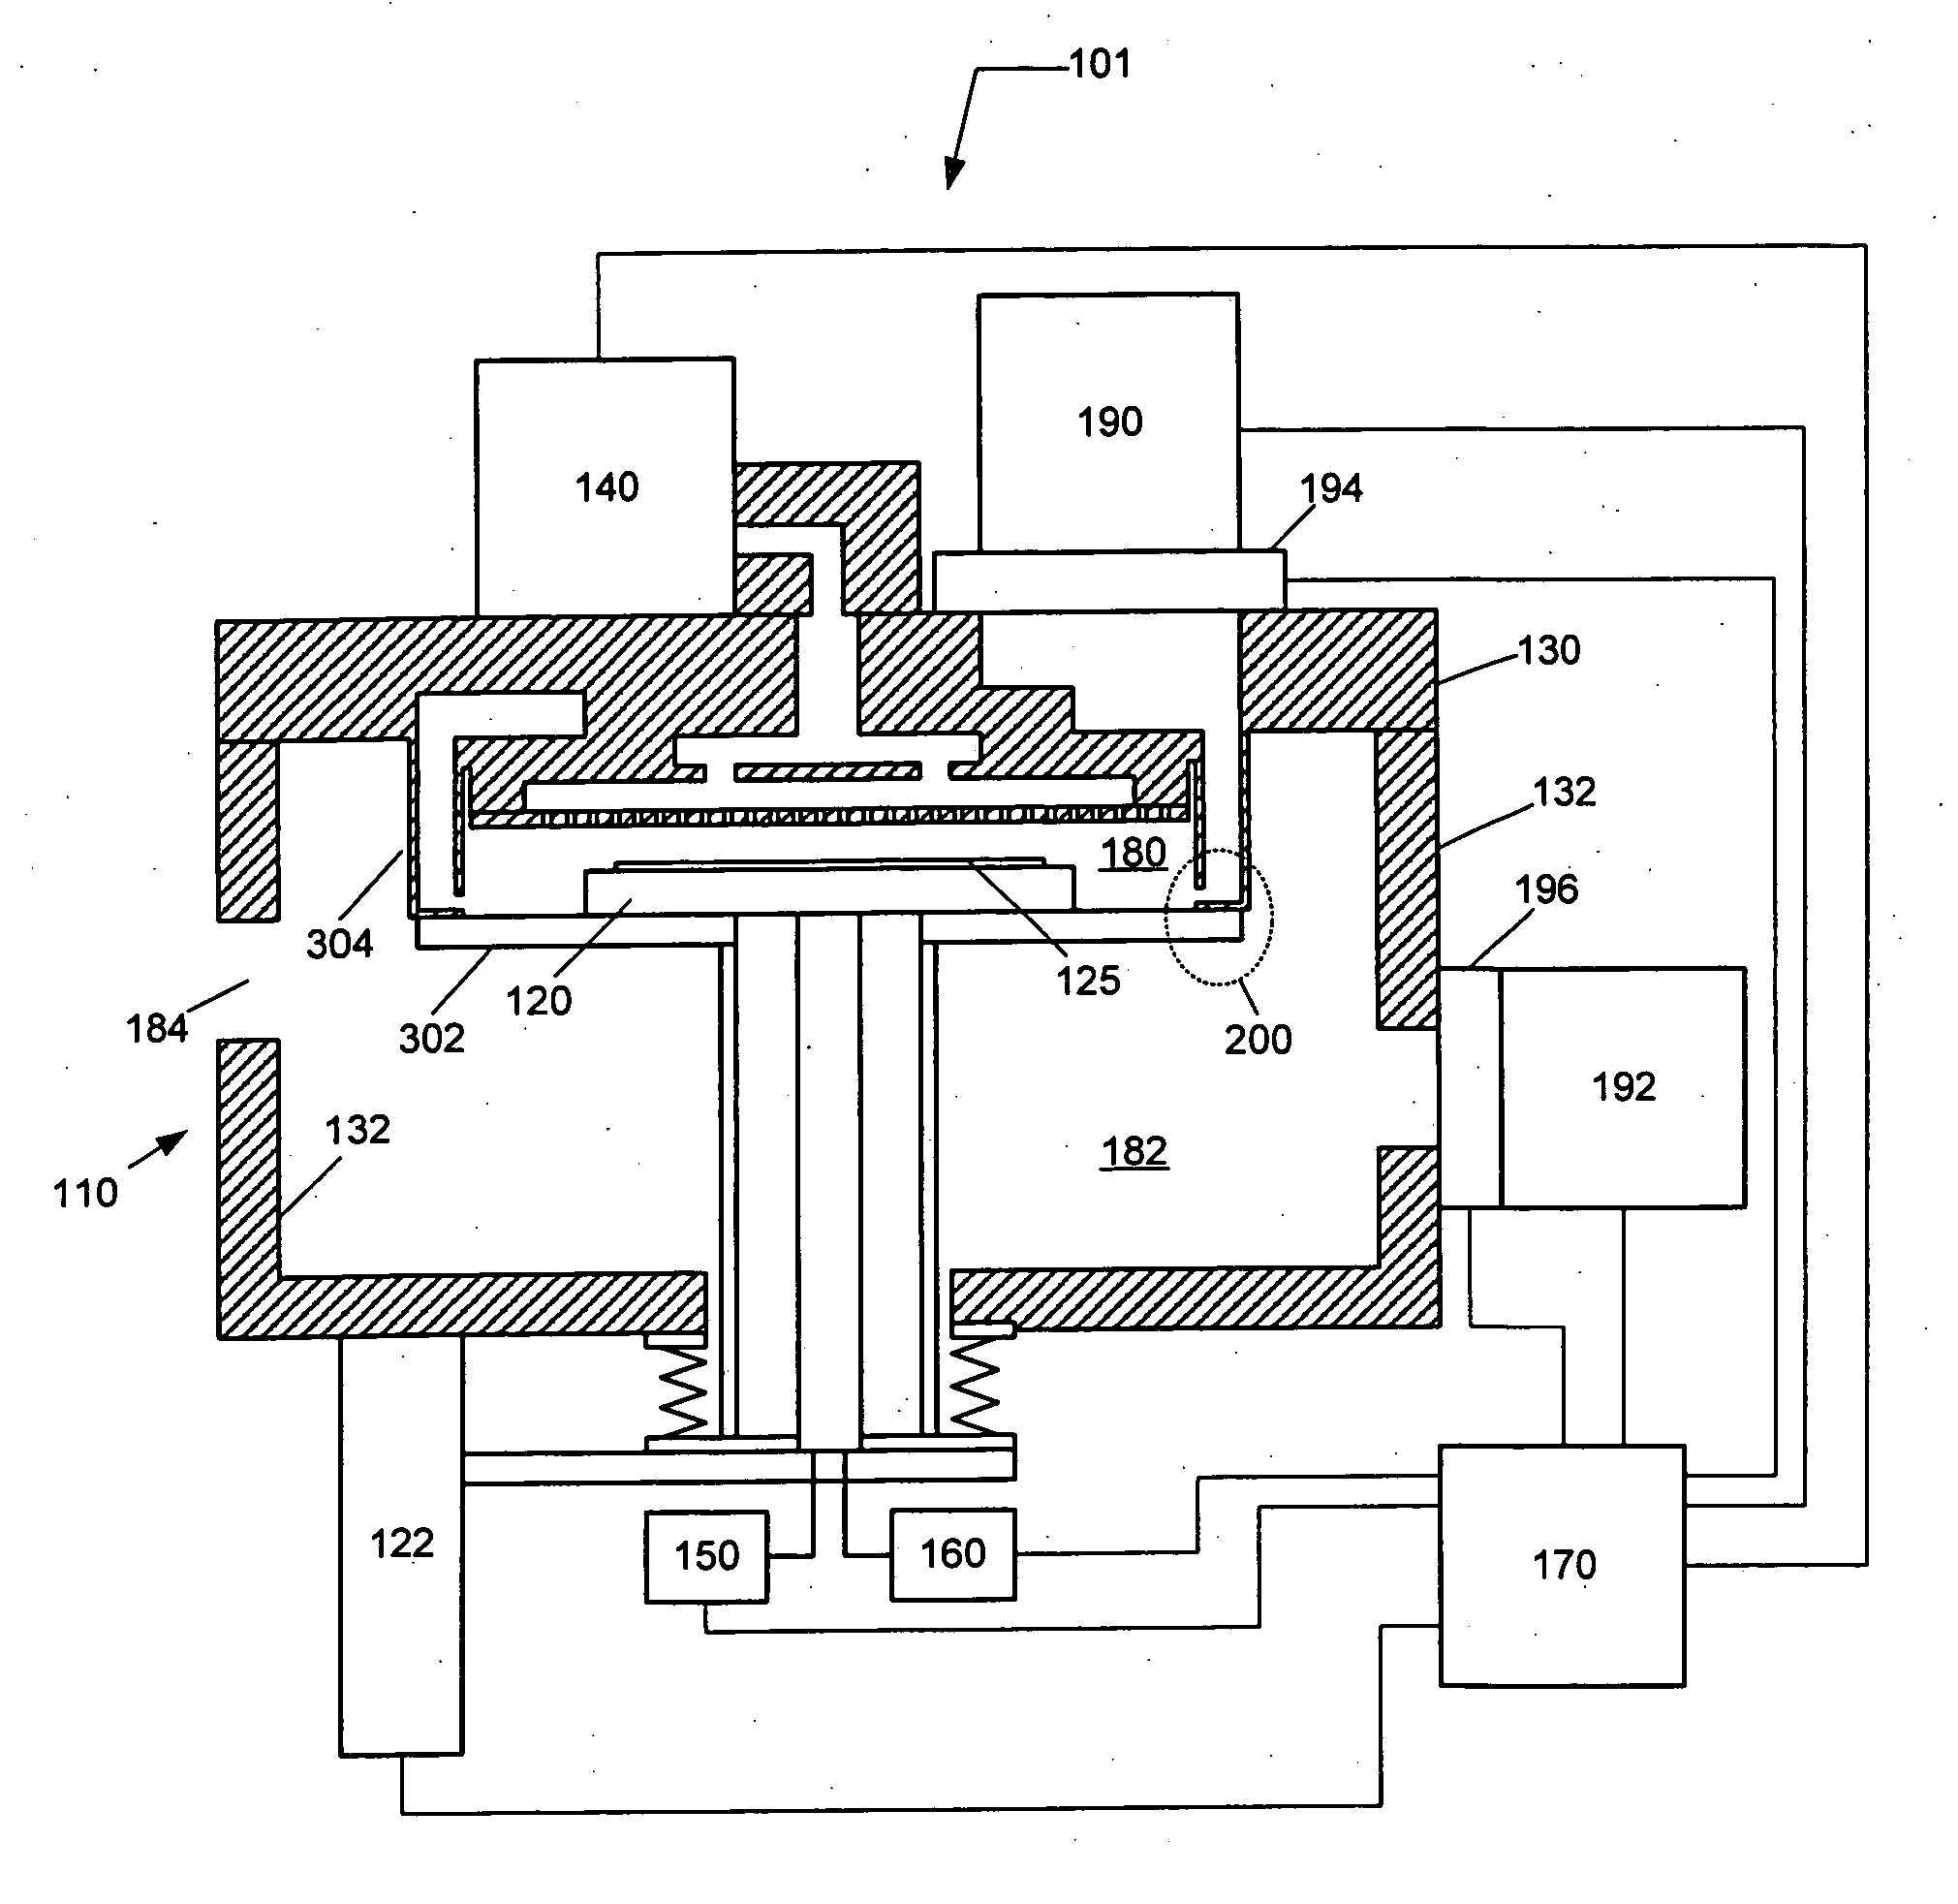 Method and system for sealing a first assembly to a second assembly of a processing system